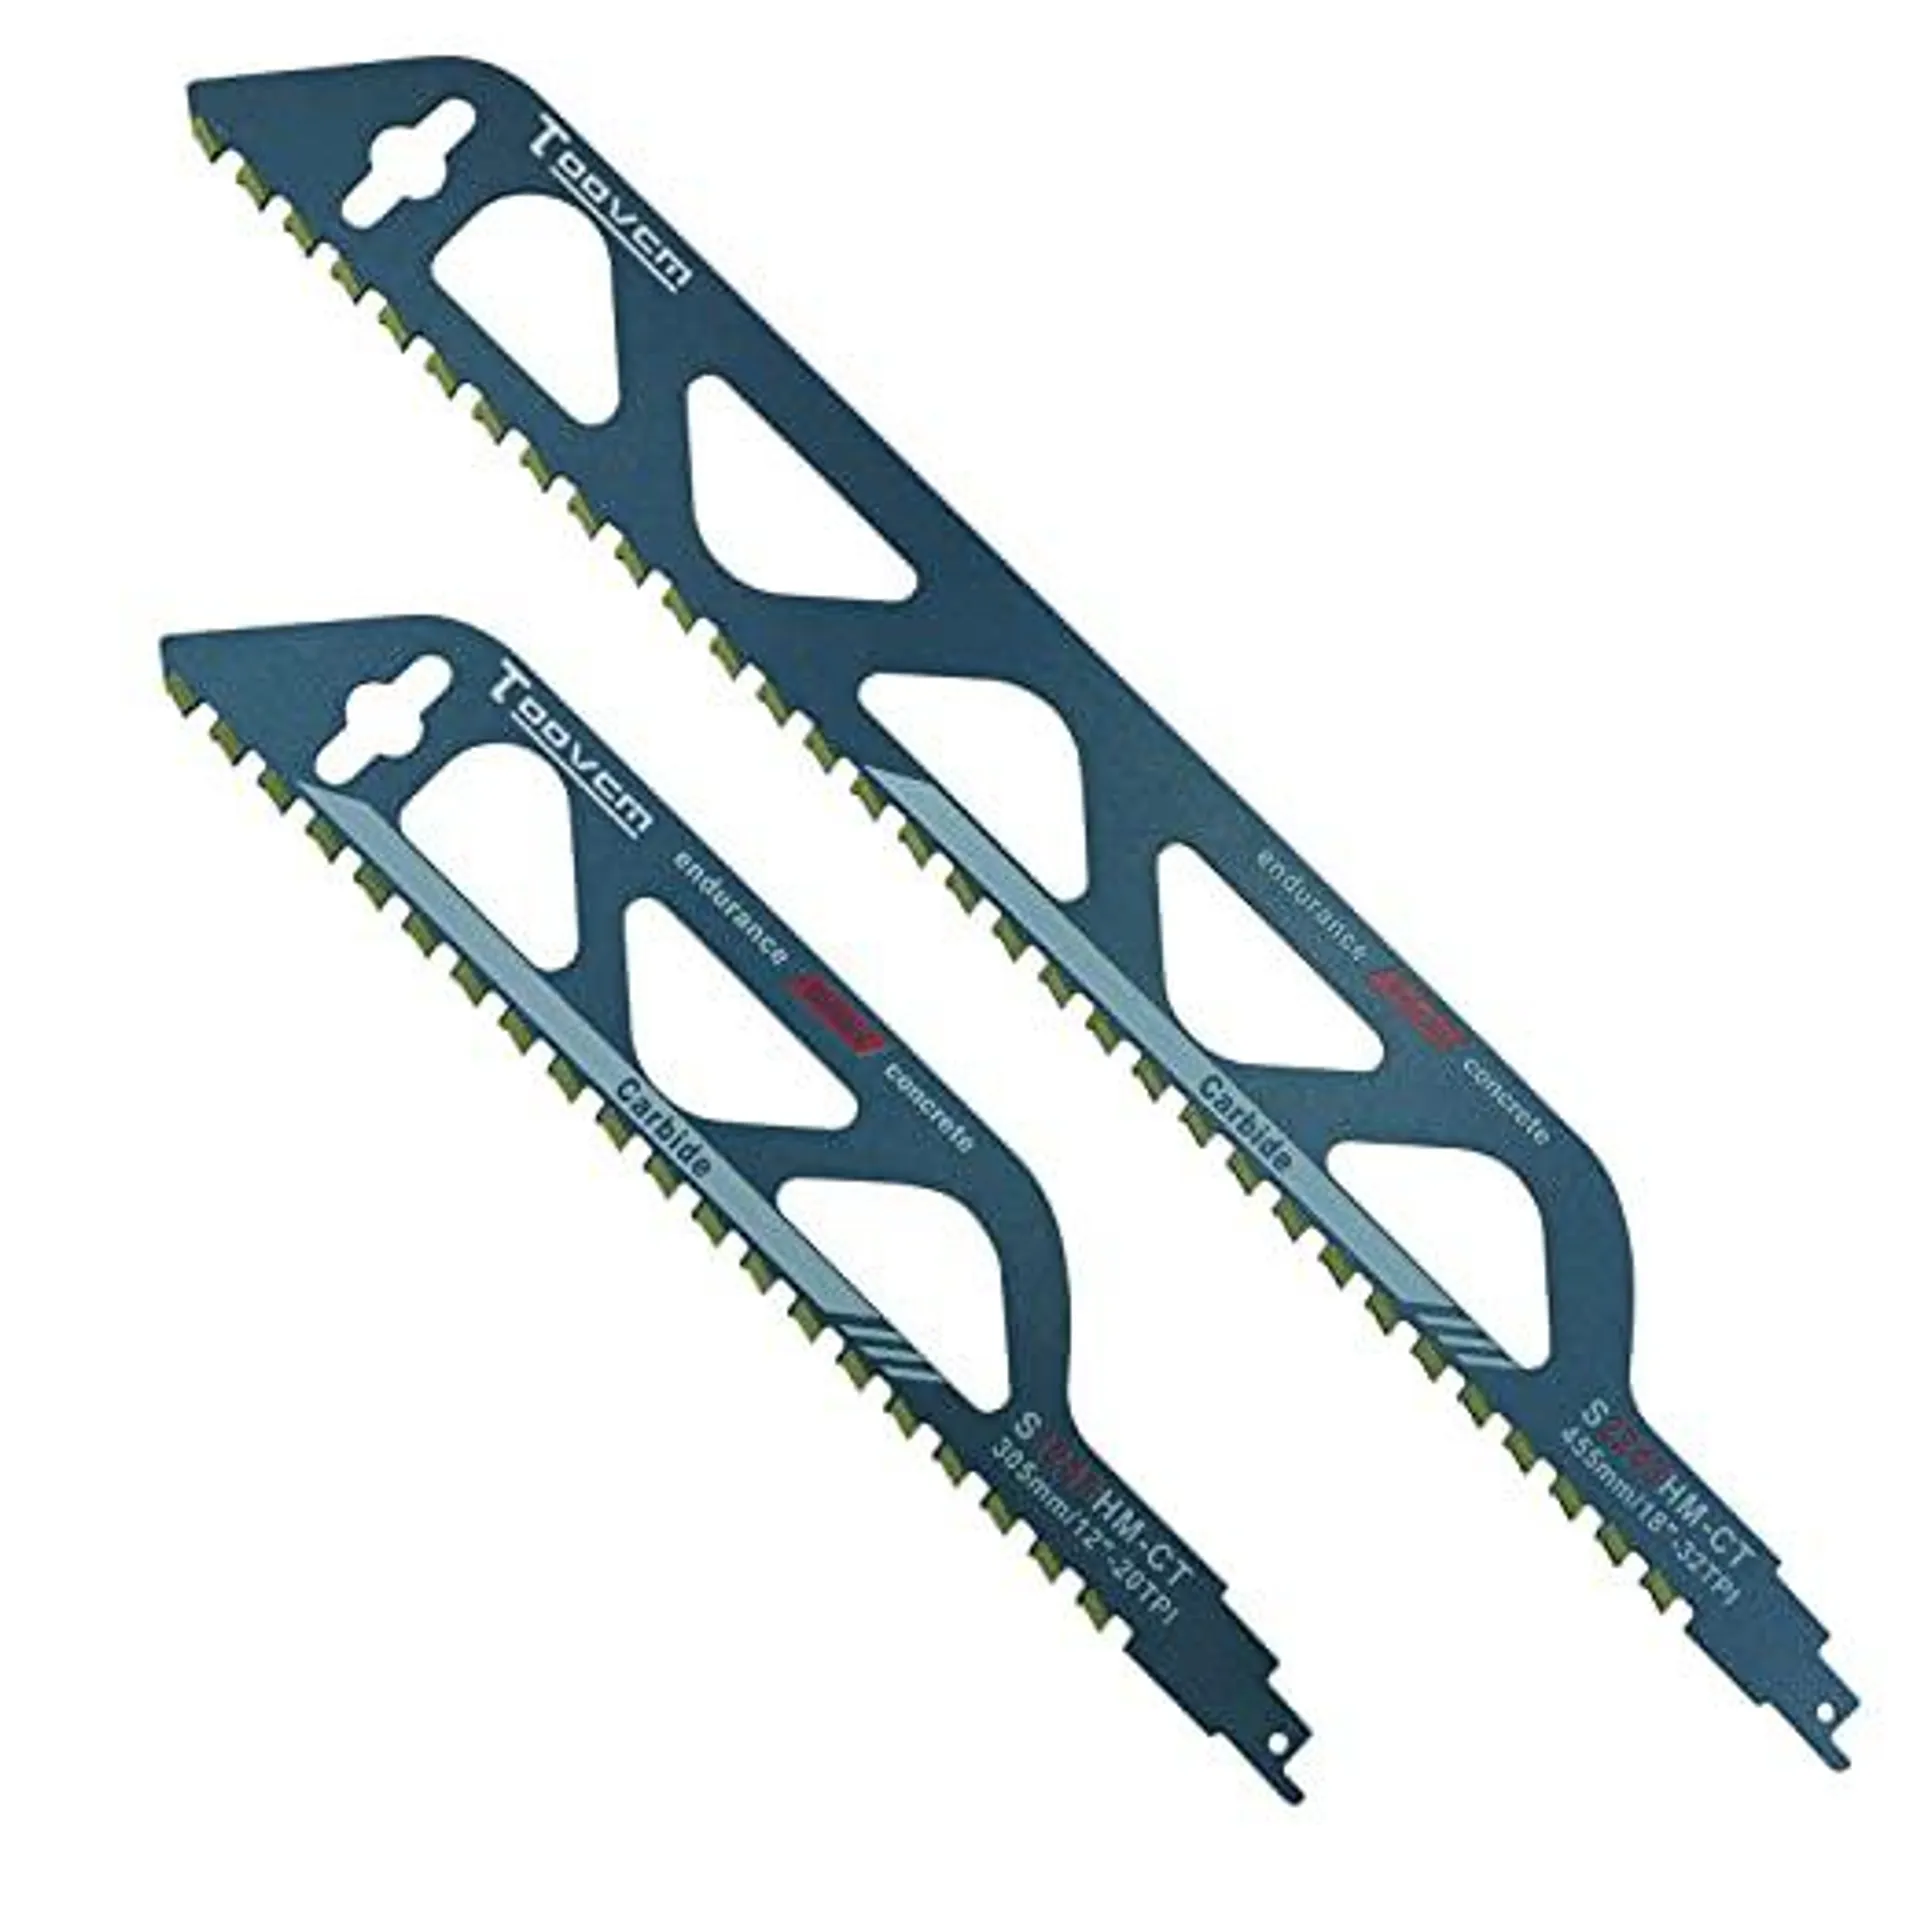 TOOVEM Reciprocating Saw Blade-Demolition Tungsten Carbide Alloy Saw Blade with High Strength and Toughness Masonry Saw Blades for Cutting Wood, Hollow Cement Brick, Porous Concrete 18/12in Set of 2